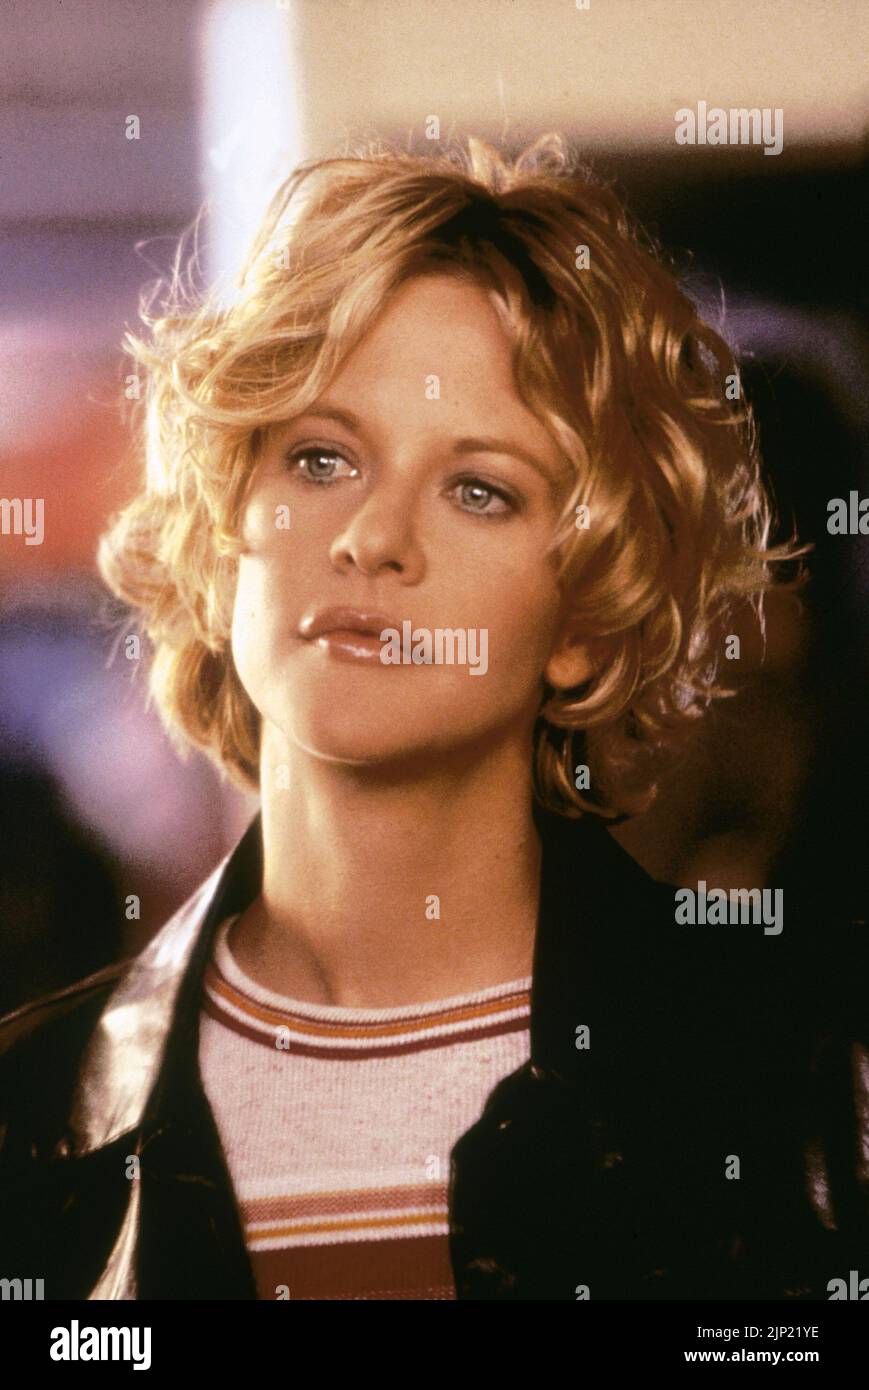 MEG RYAN in PROOF OF LIFE (2000), directed by TAYLOR HACKFORD. Credit: CASTLE ROCK ENTERTAINMENT / Album Stock Photo